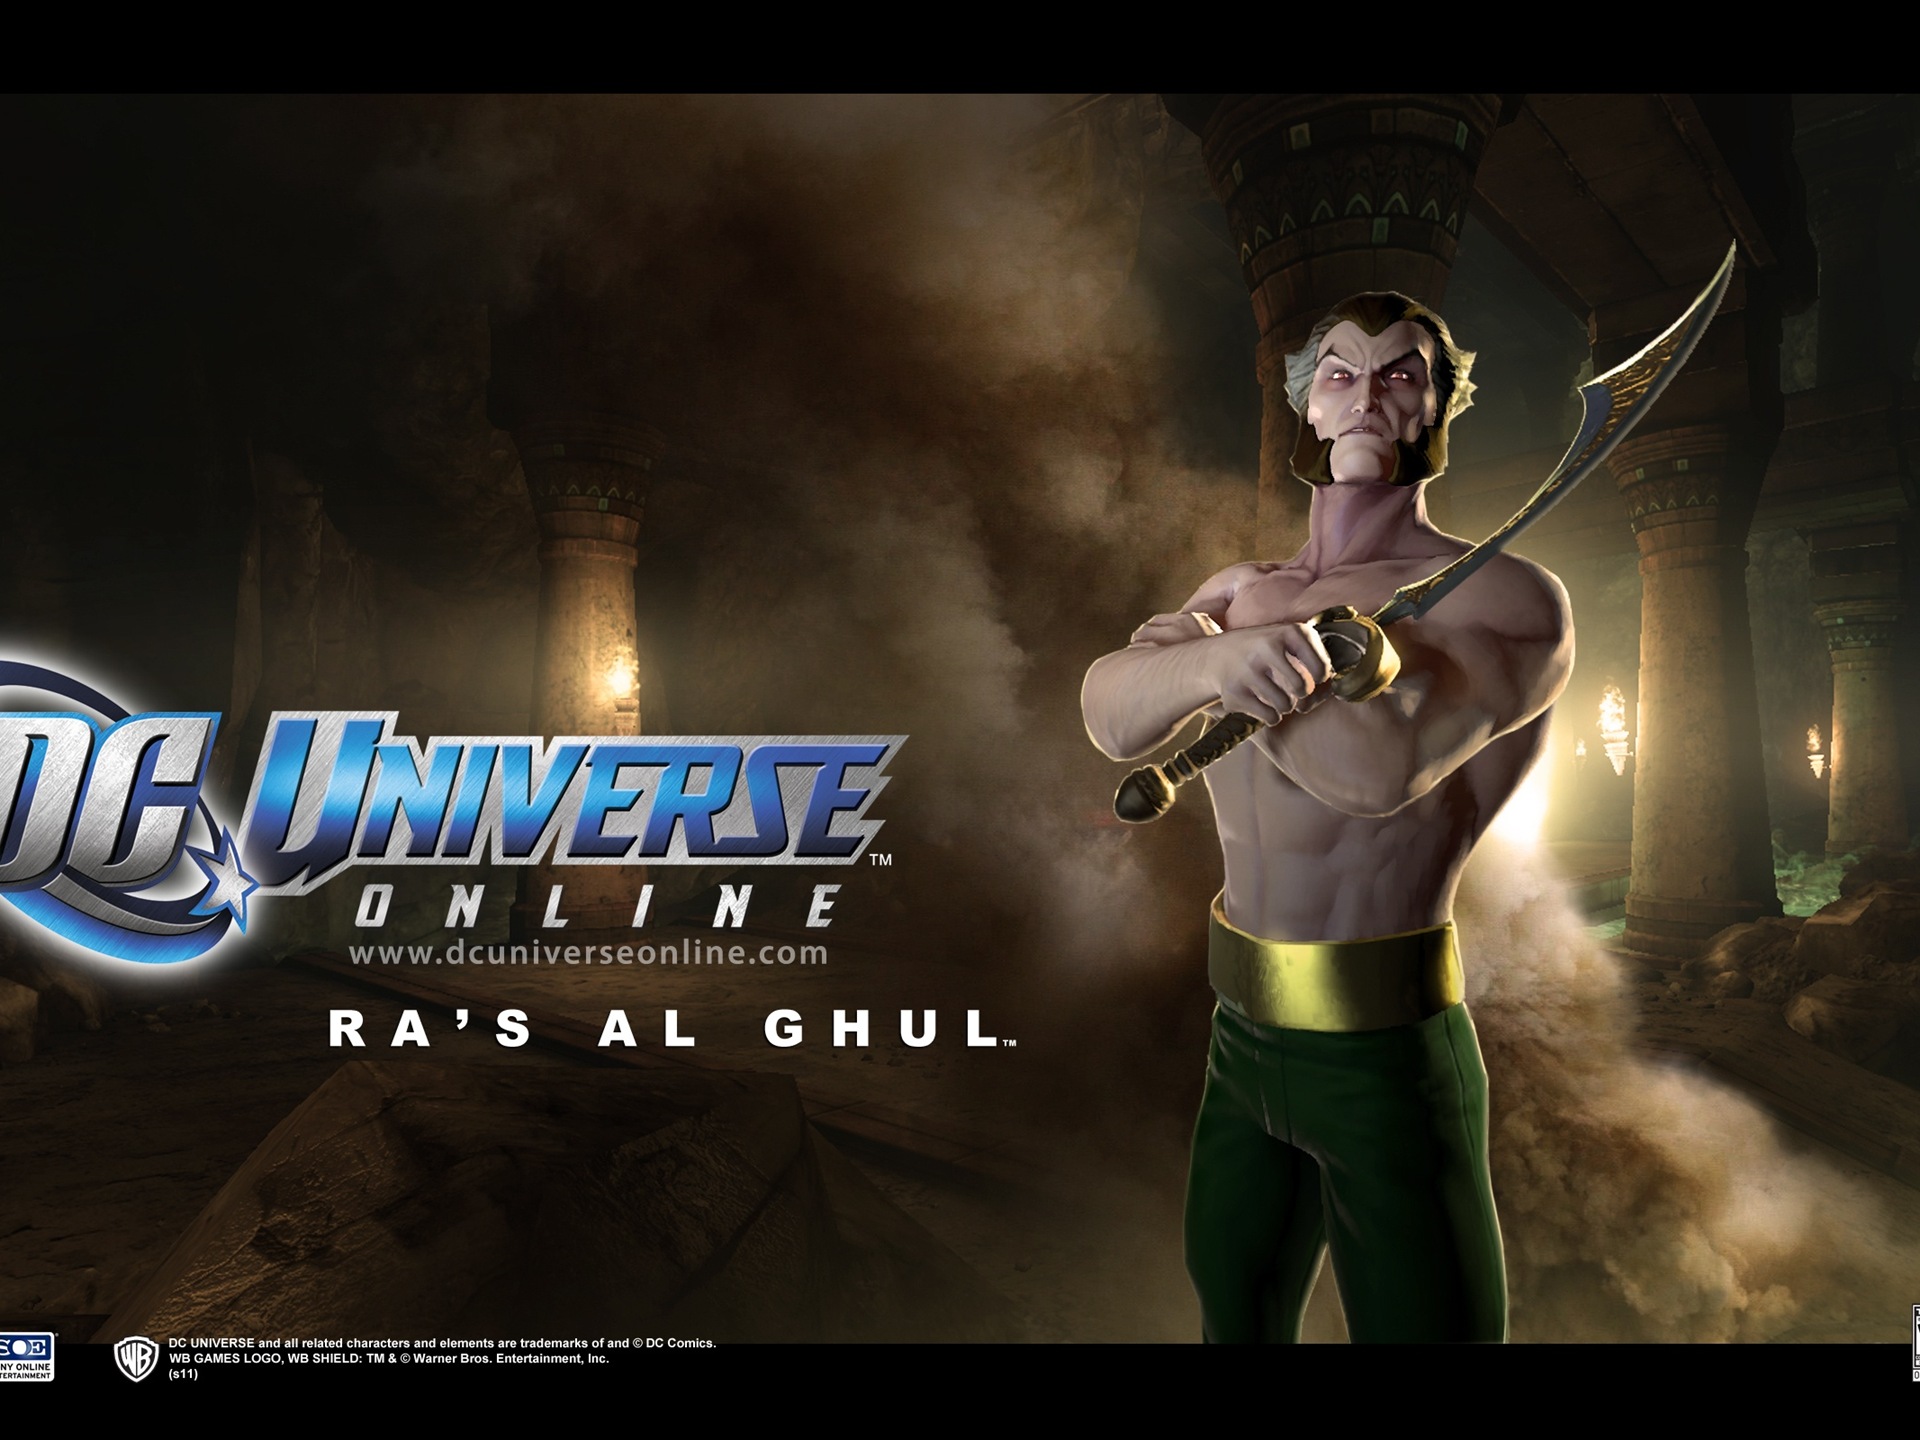 DC Universe Online HD game wallpapers #8 - 1920x1440